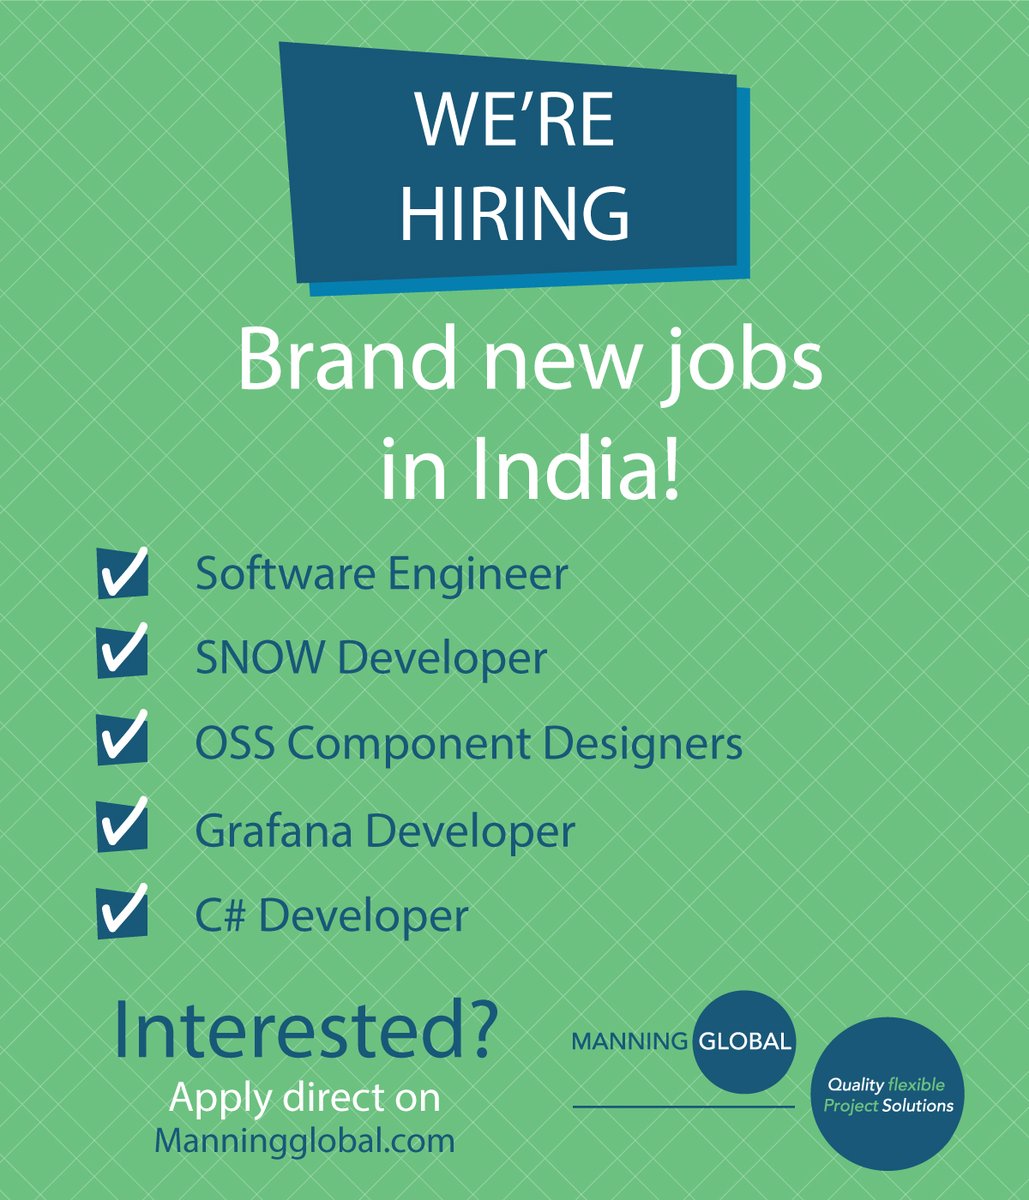 Calling all #Developers, #Engineers and #Designers! We're hiring in #India! 🇮🇳 Brand new roles just added... ... Head to ManningGlobal.com for full details & easy apply! #SoftwareEngineer #Developer #FullStackDeveloper #JavaScript #SOAP #REST #UI #Cloud #AWS #Azure